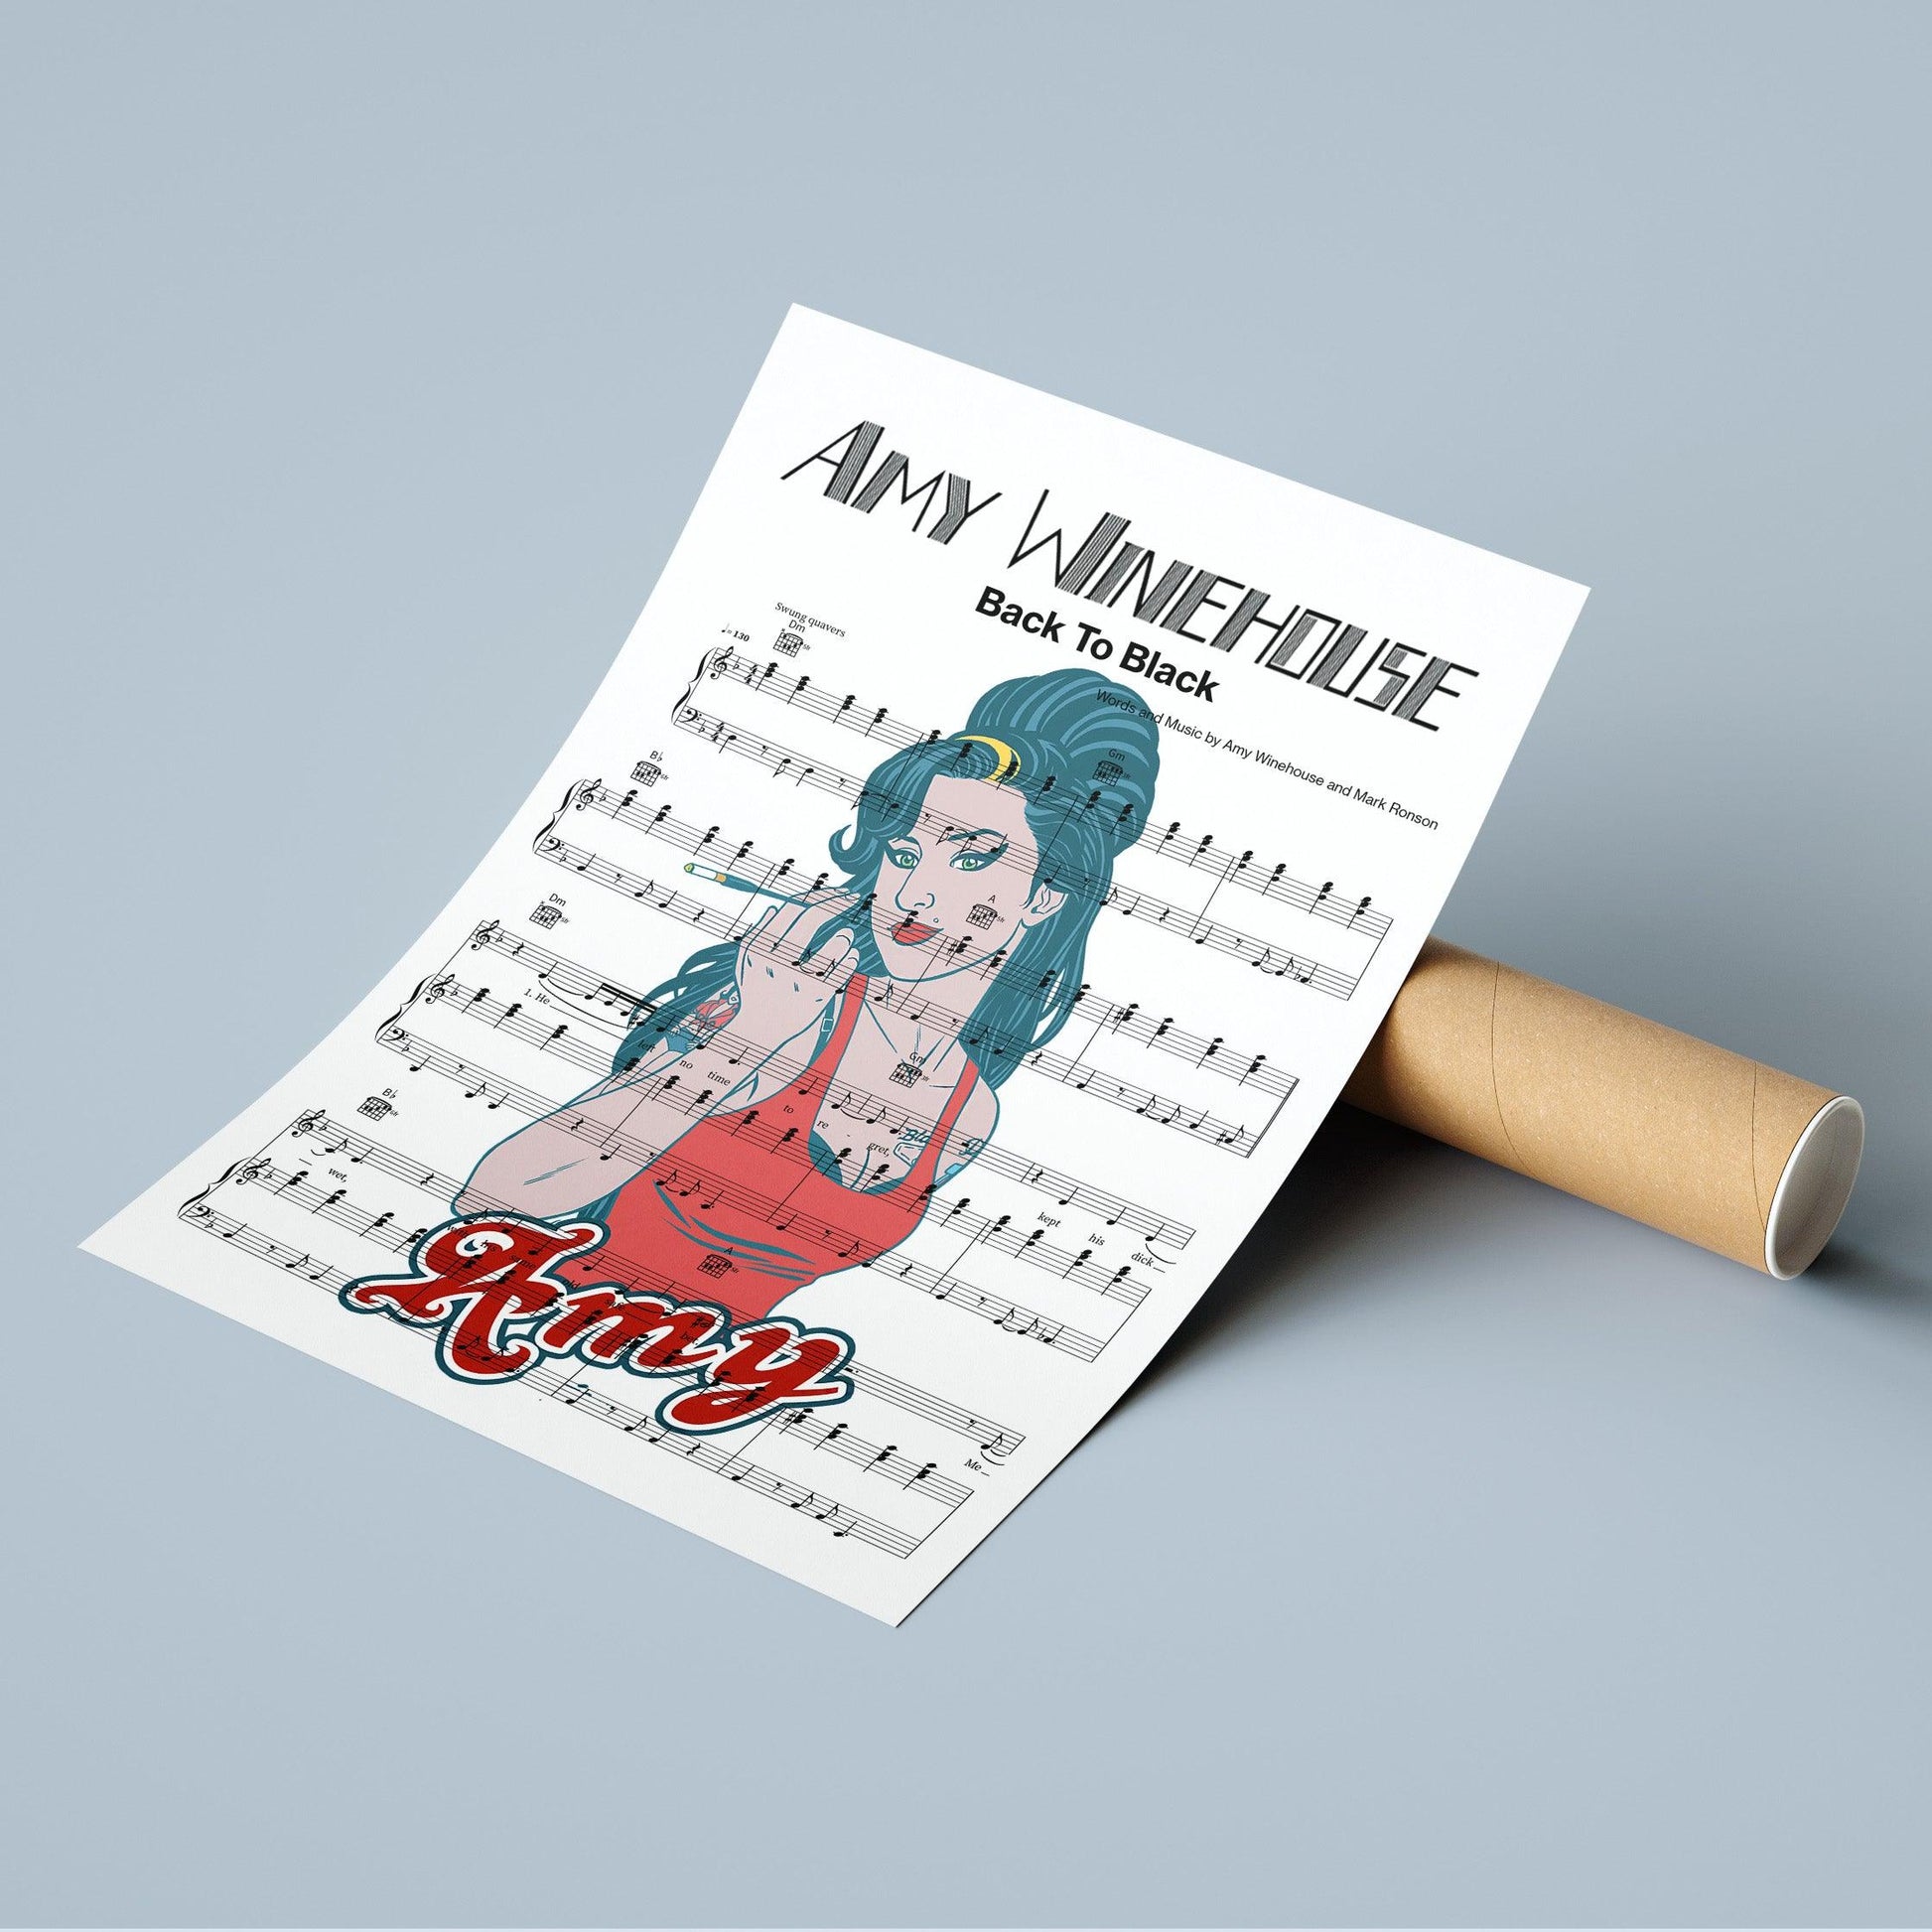 Print lyrical with these unusual and Natural High quality black and white musical scores with brightly coloured illustrations and quirky art print by artist Amy Winehouse - Back To Black to put on the wall of the room at home. A4 Posters uk By 98types art online.